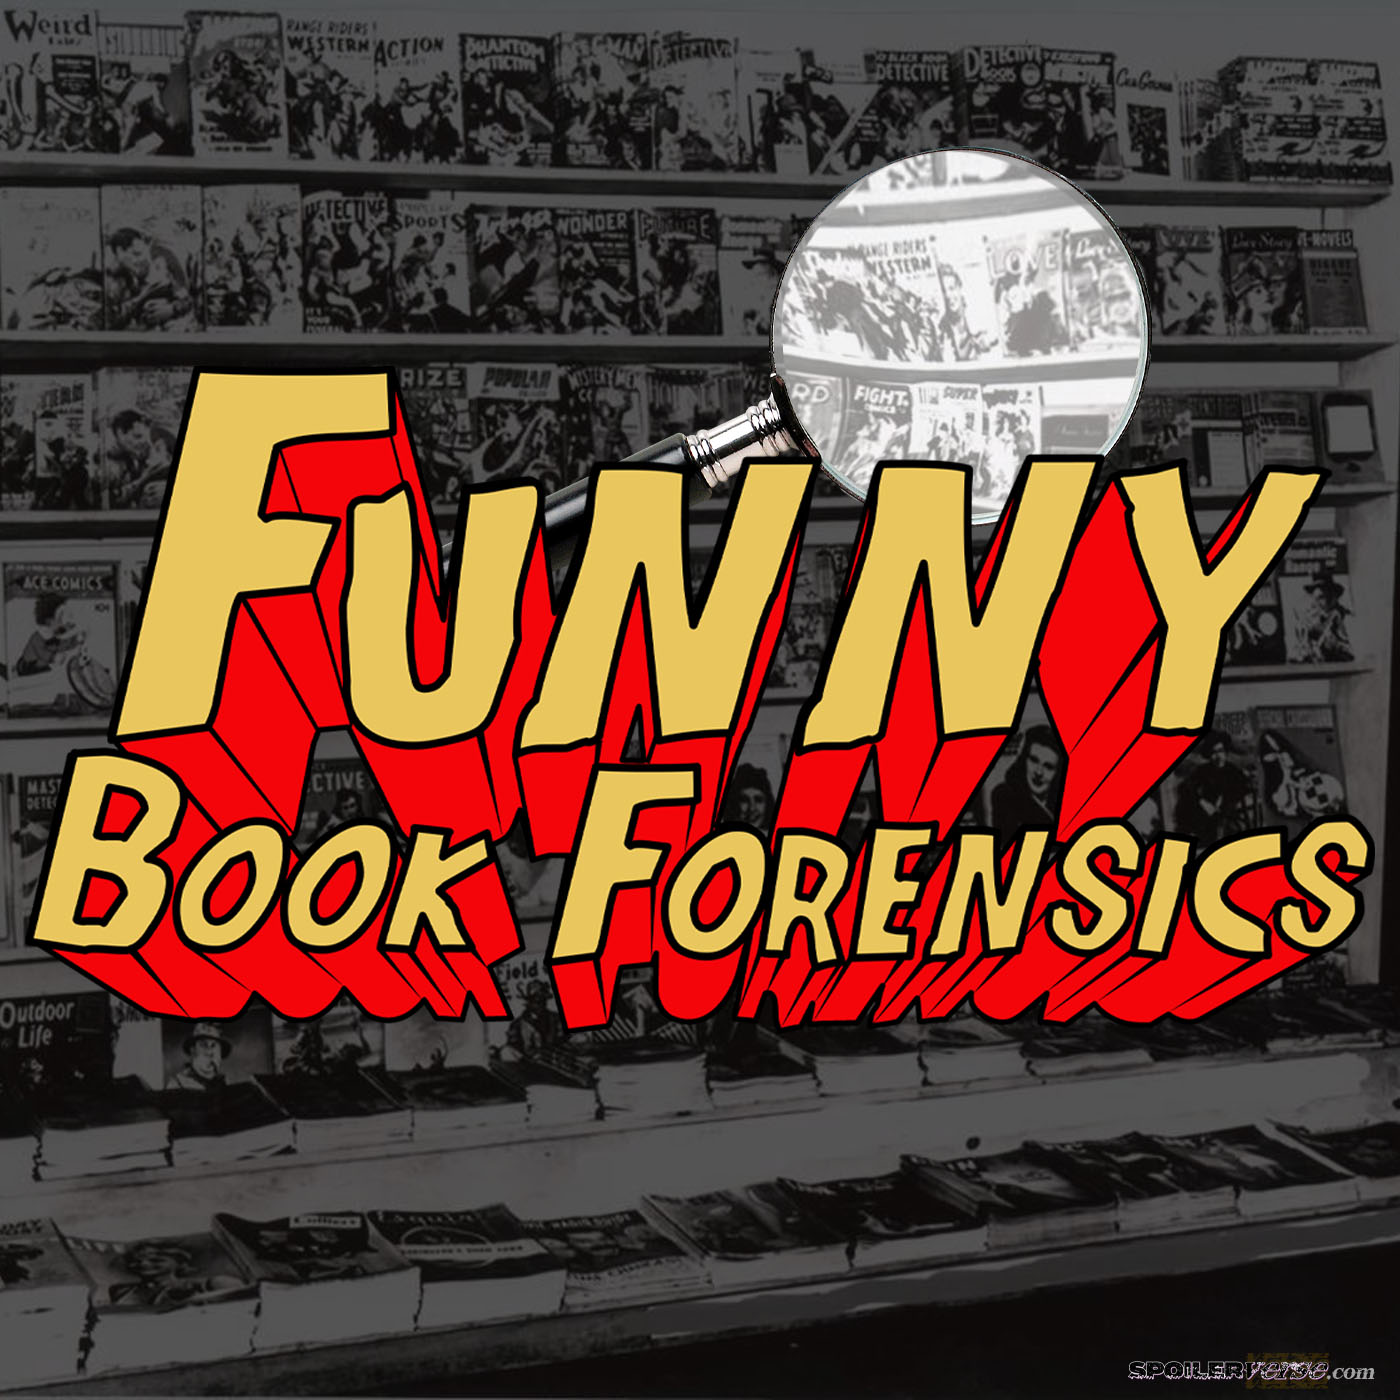 Funny Book Forensics 319 What If…? This was a good episode